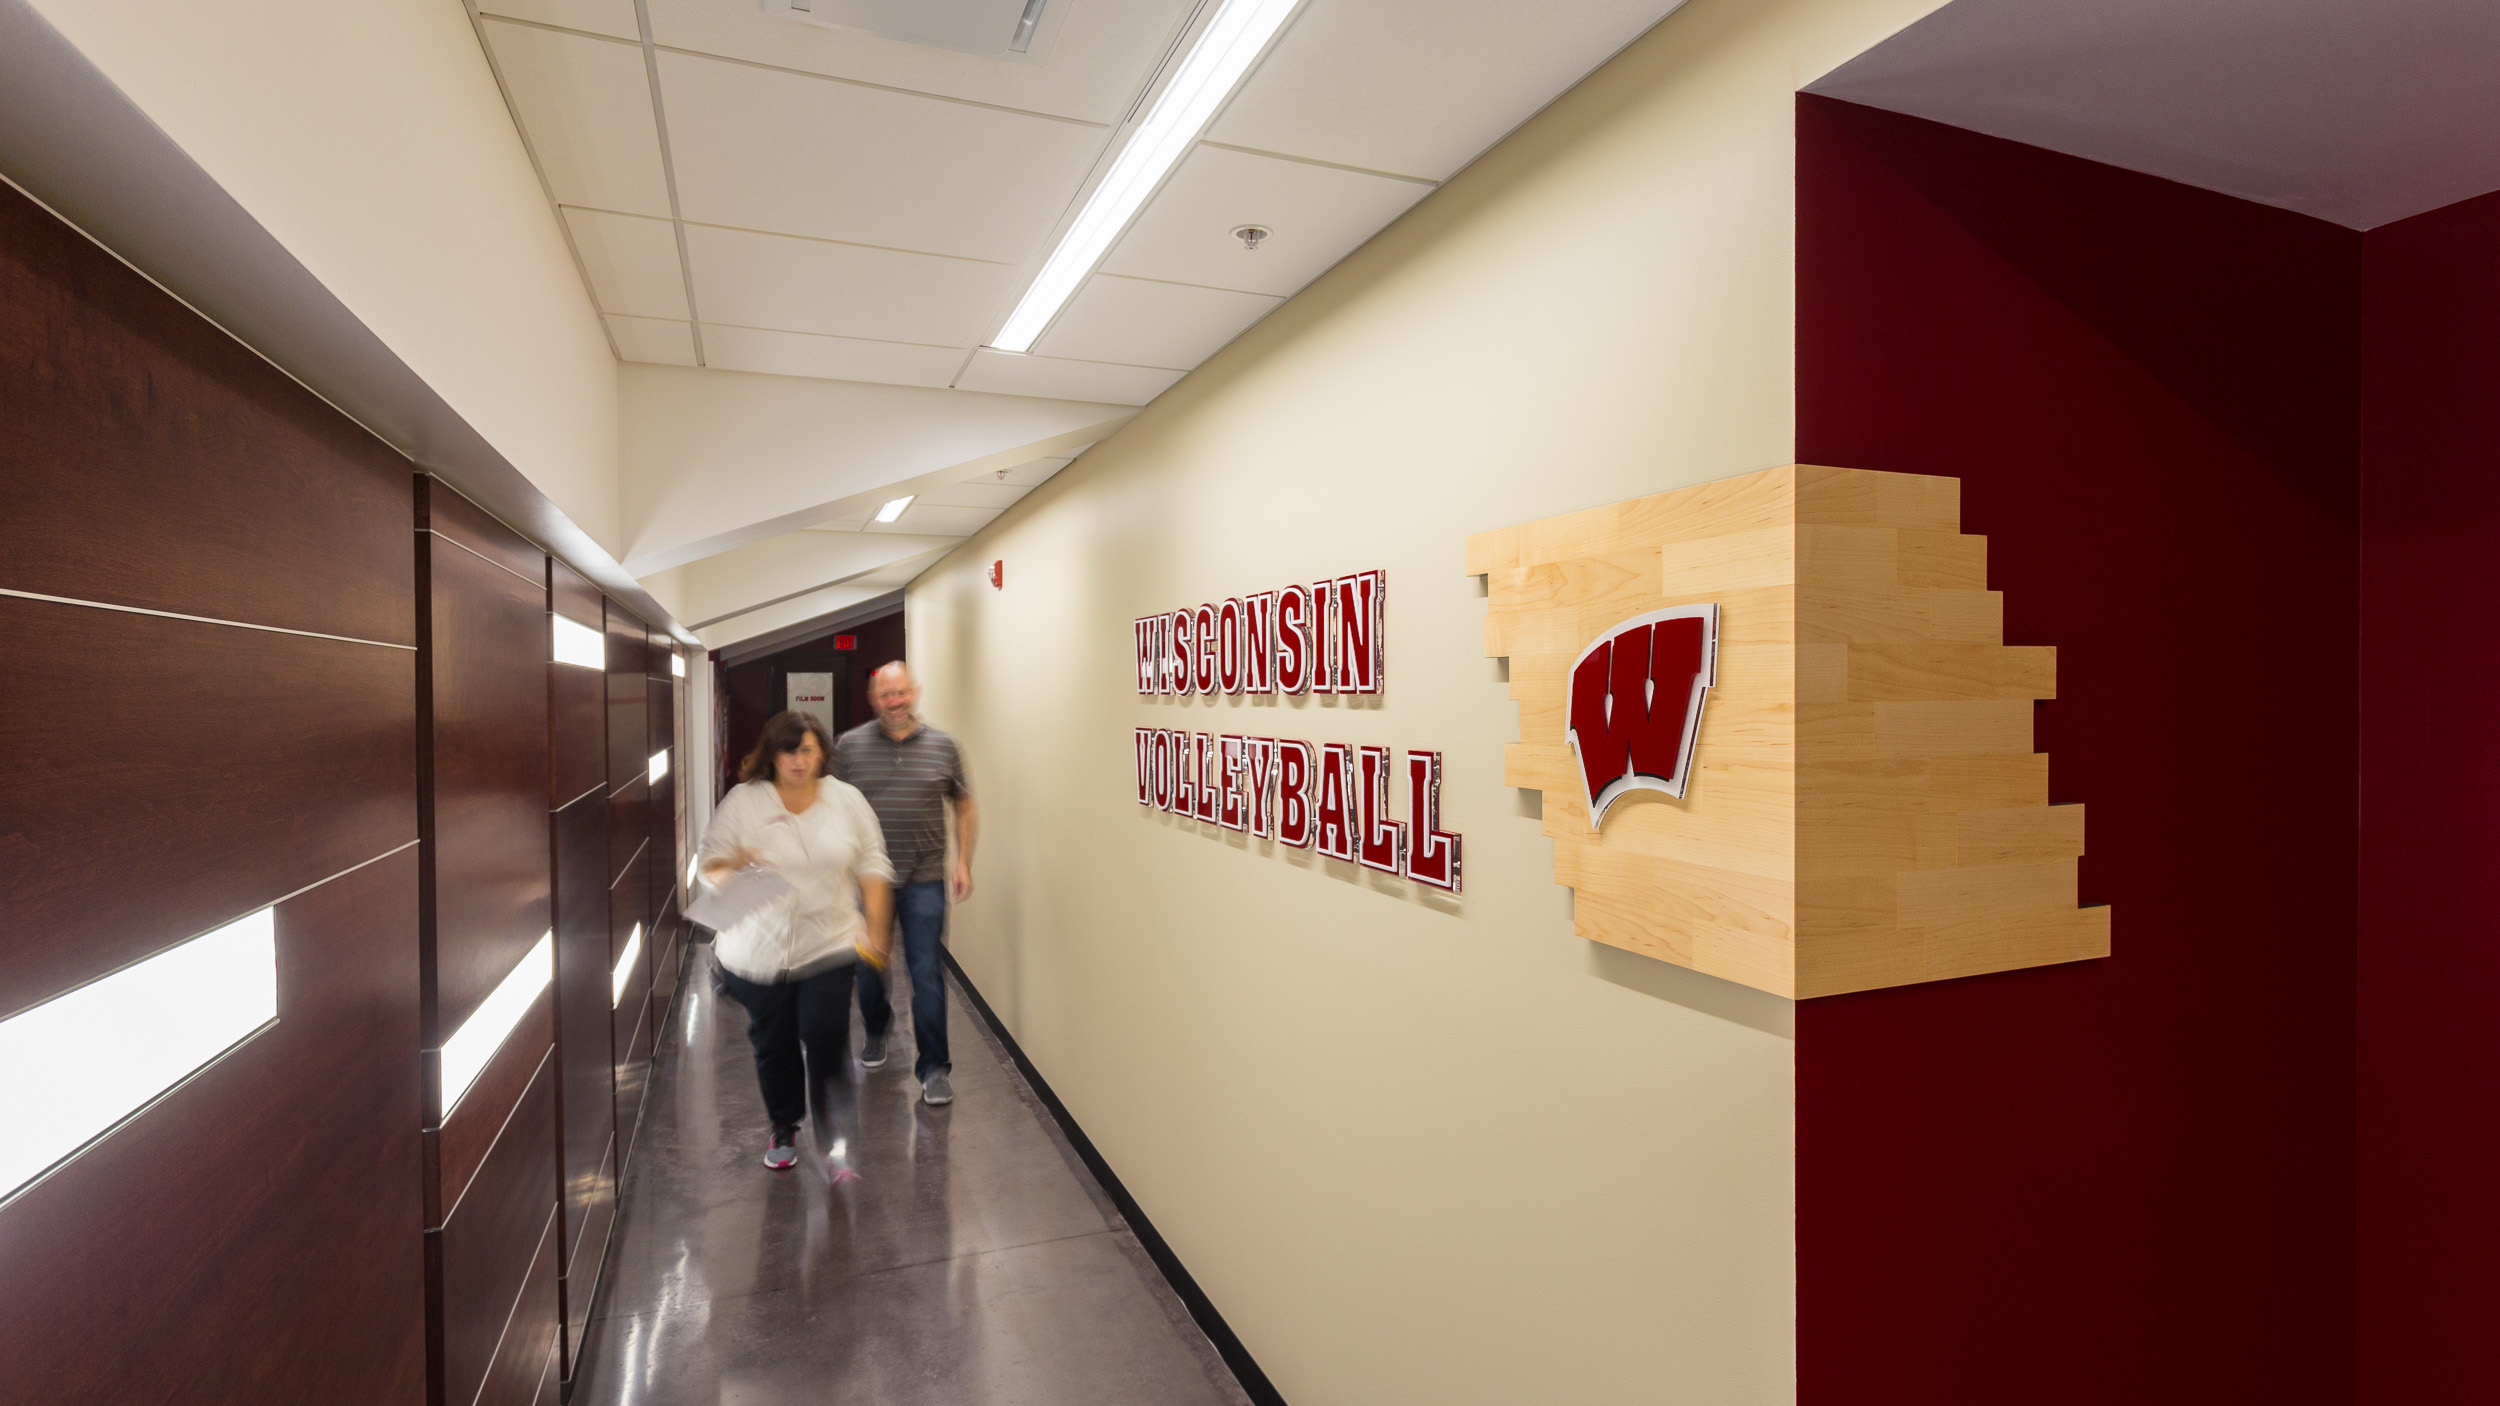 University of Wisconsin - Volleyball Locker Room Feature Wall